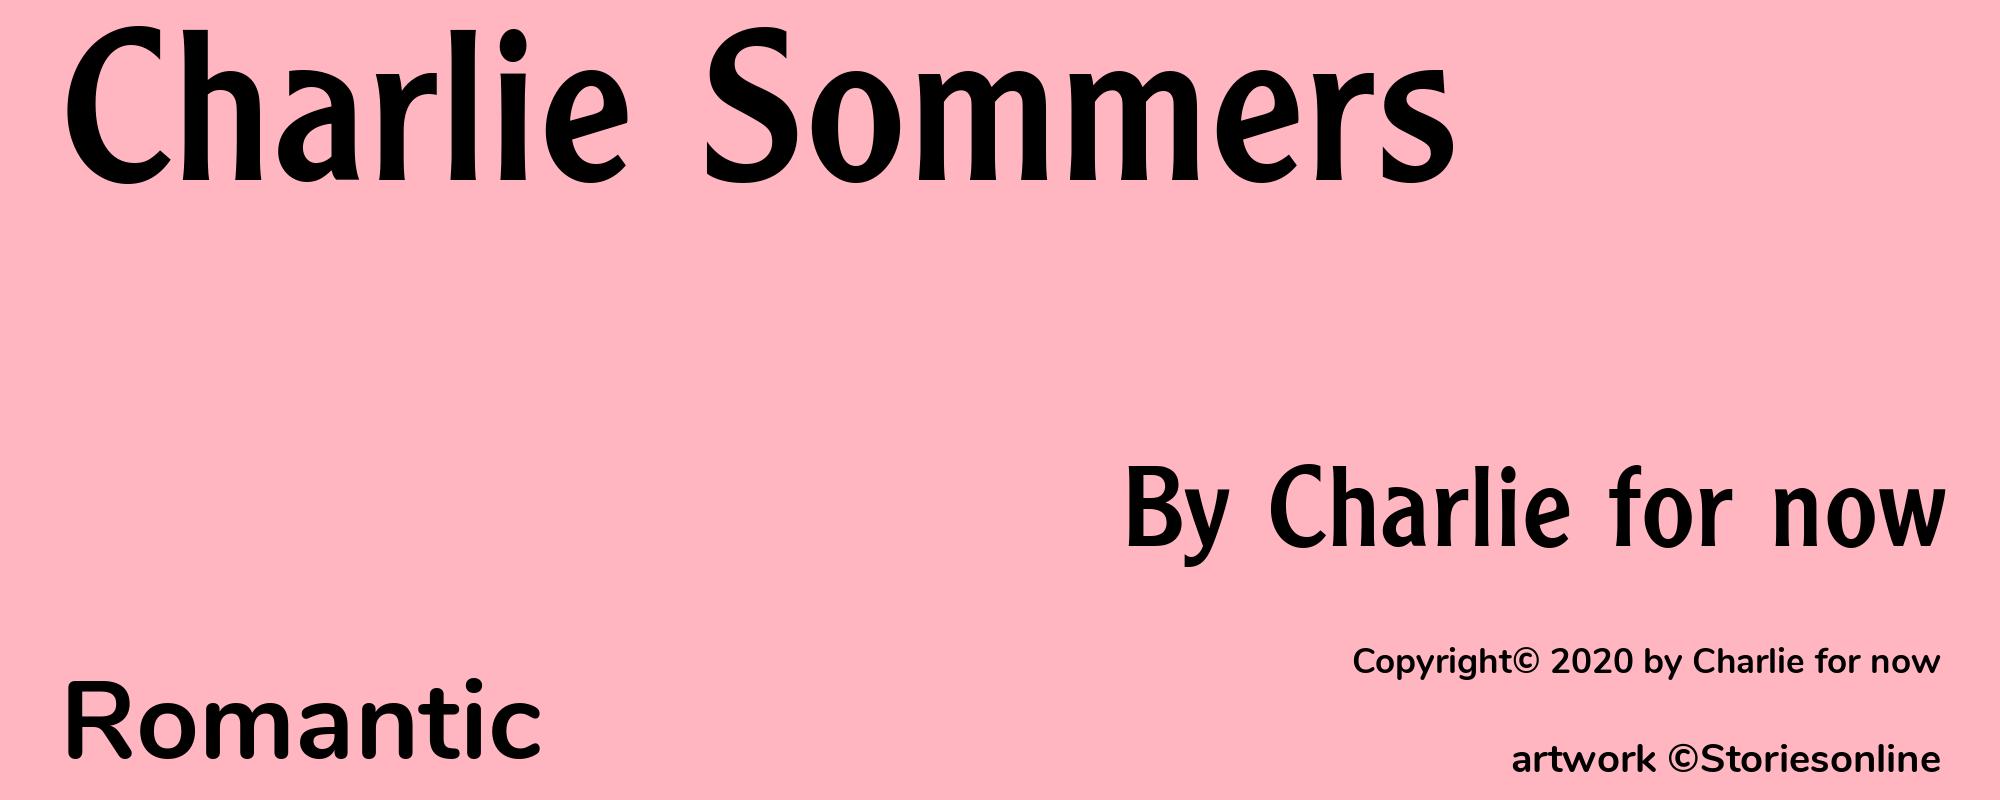 Charlie Sommers - Cover